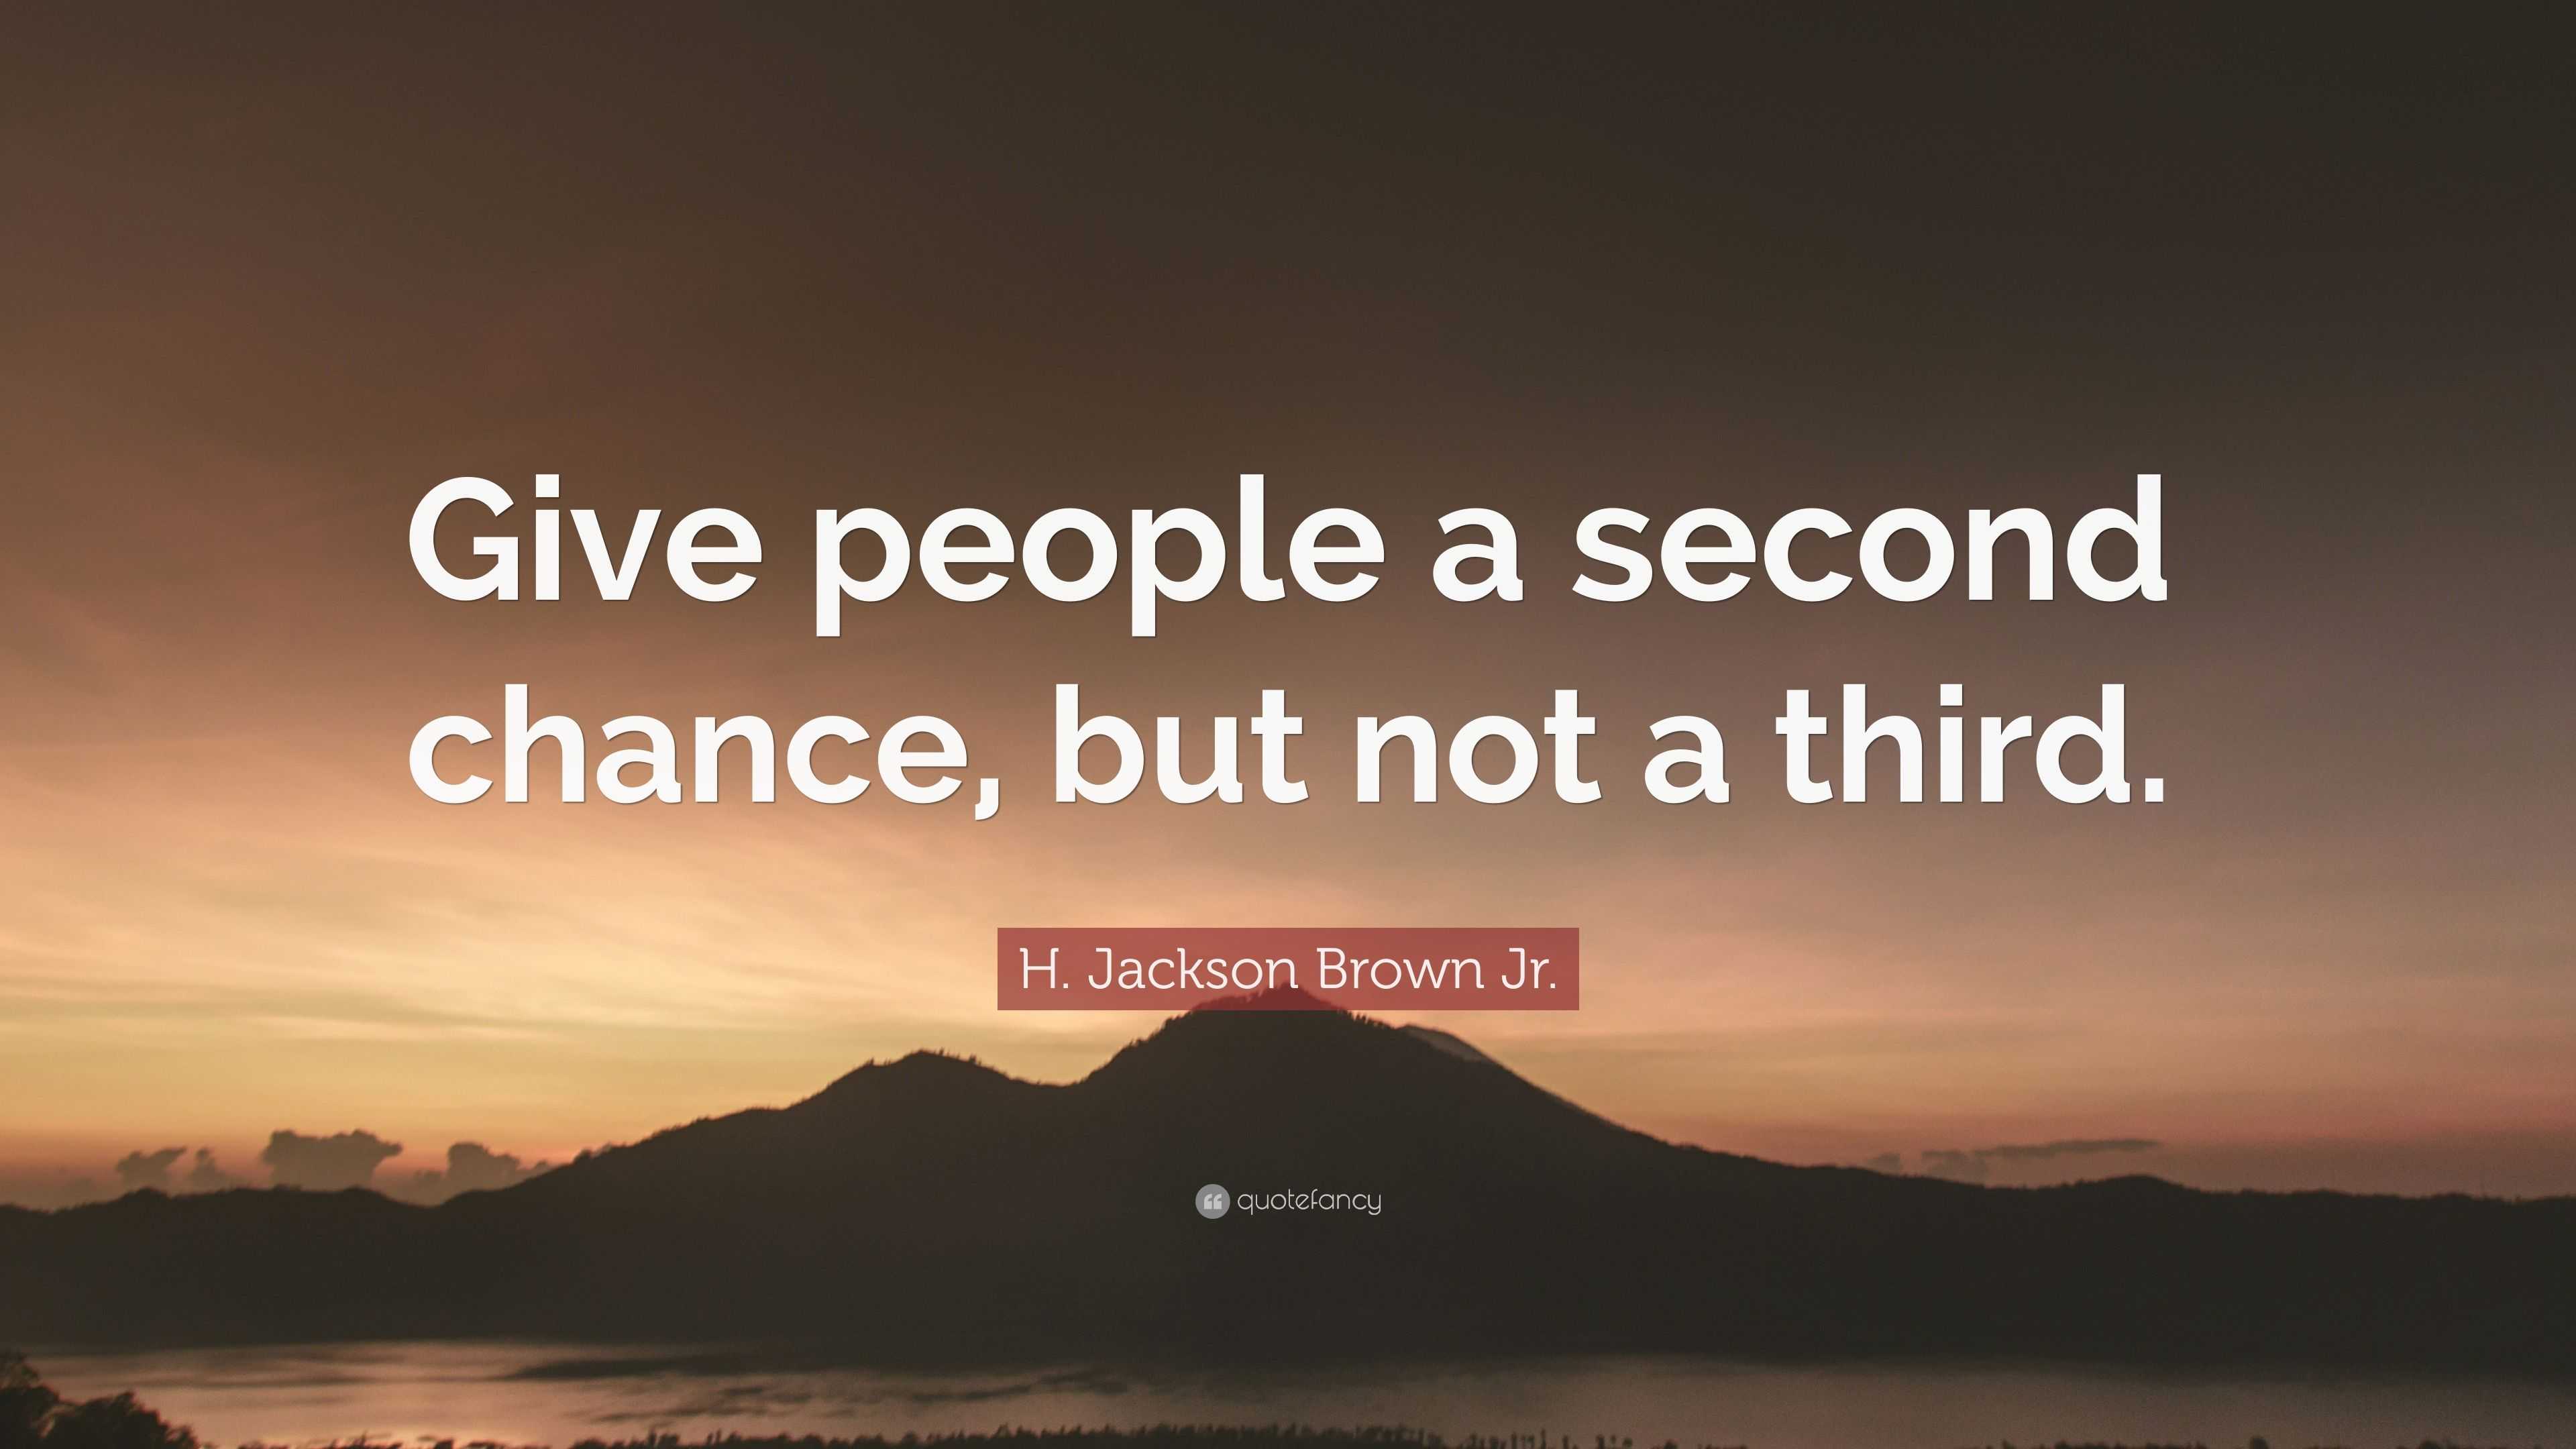 H. Jackson Brown Jr. Quote “Give people a second chance